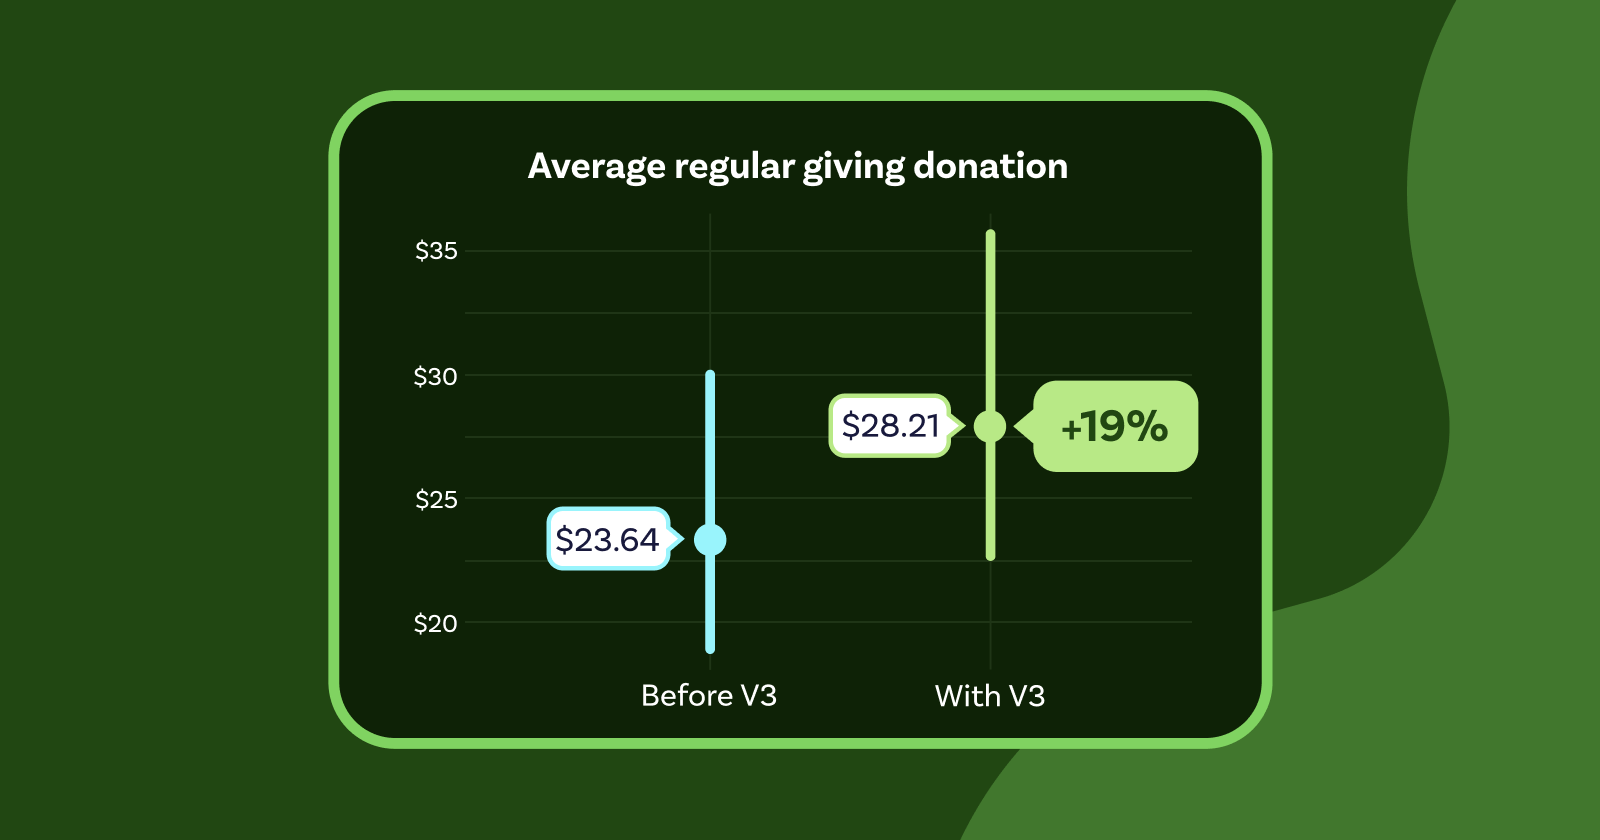 Campaigns switching to our new donation form are seeing a 48% increase in fundraising